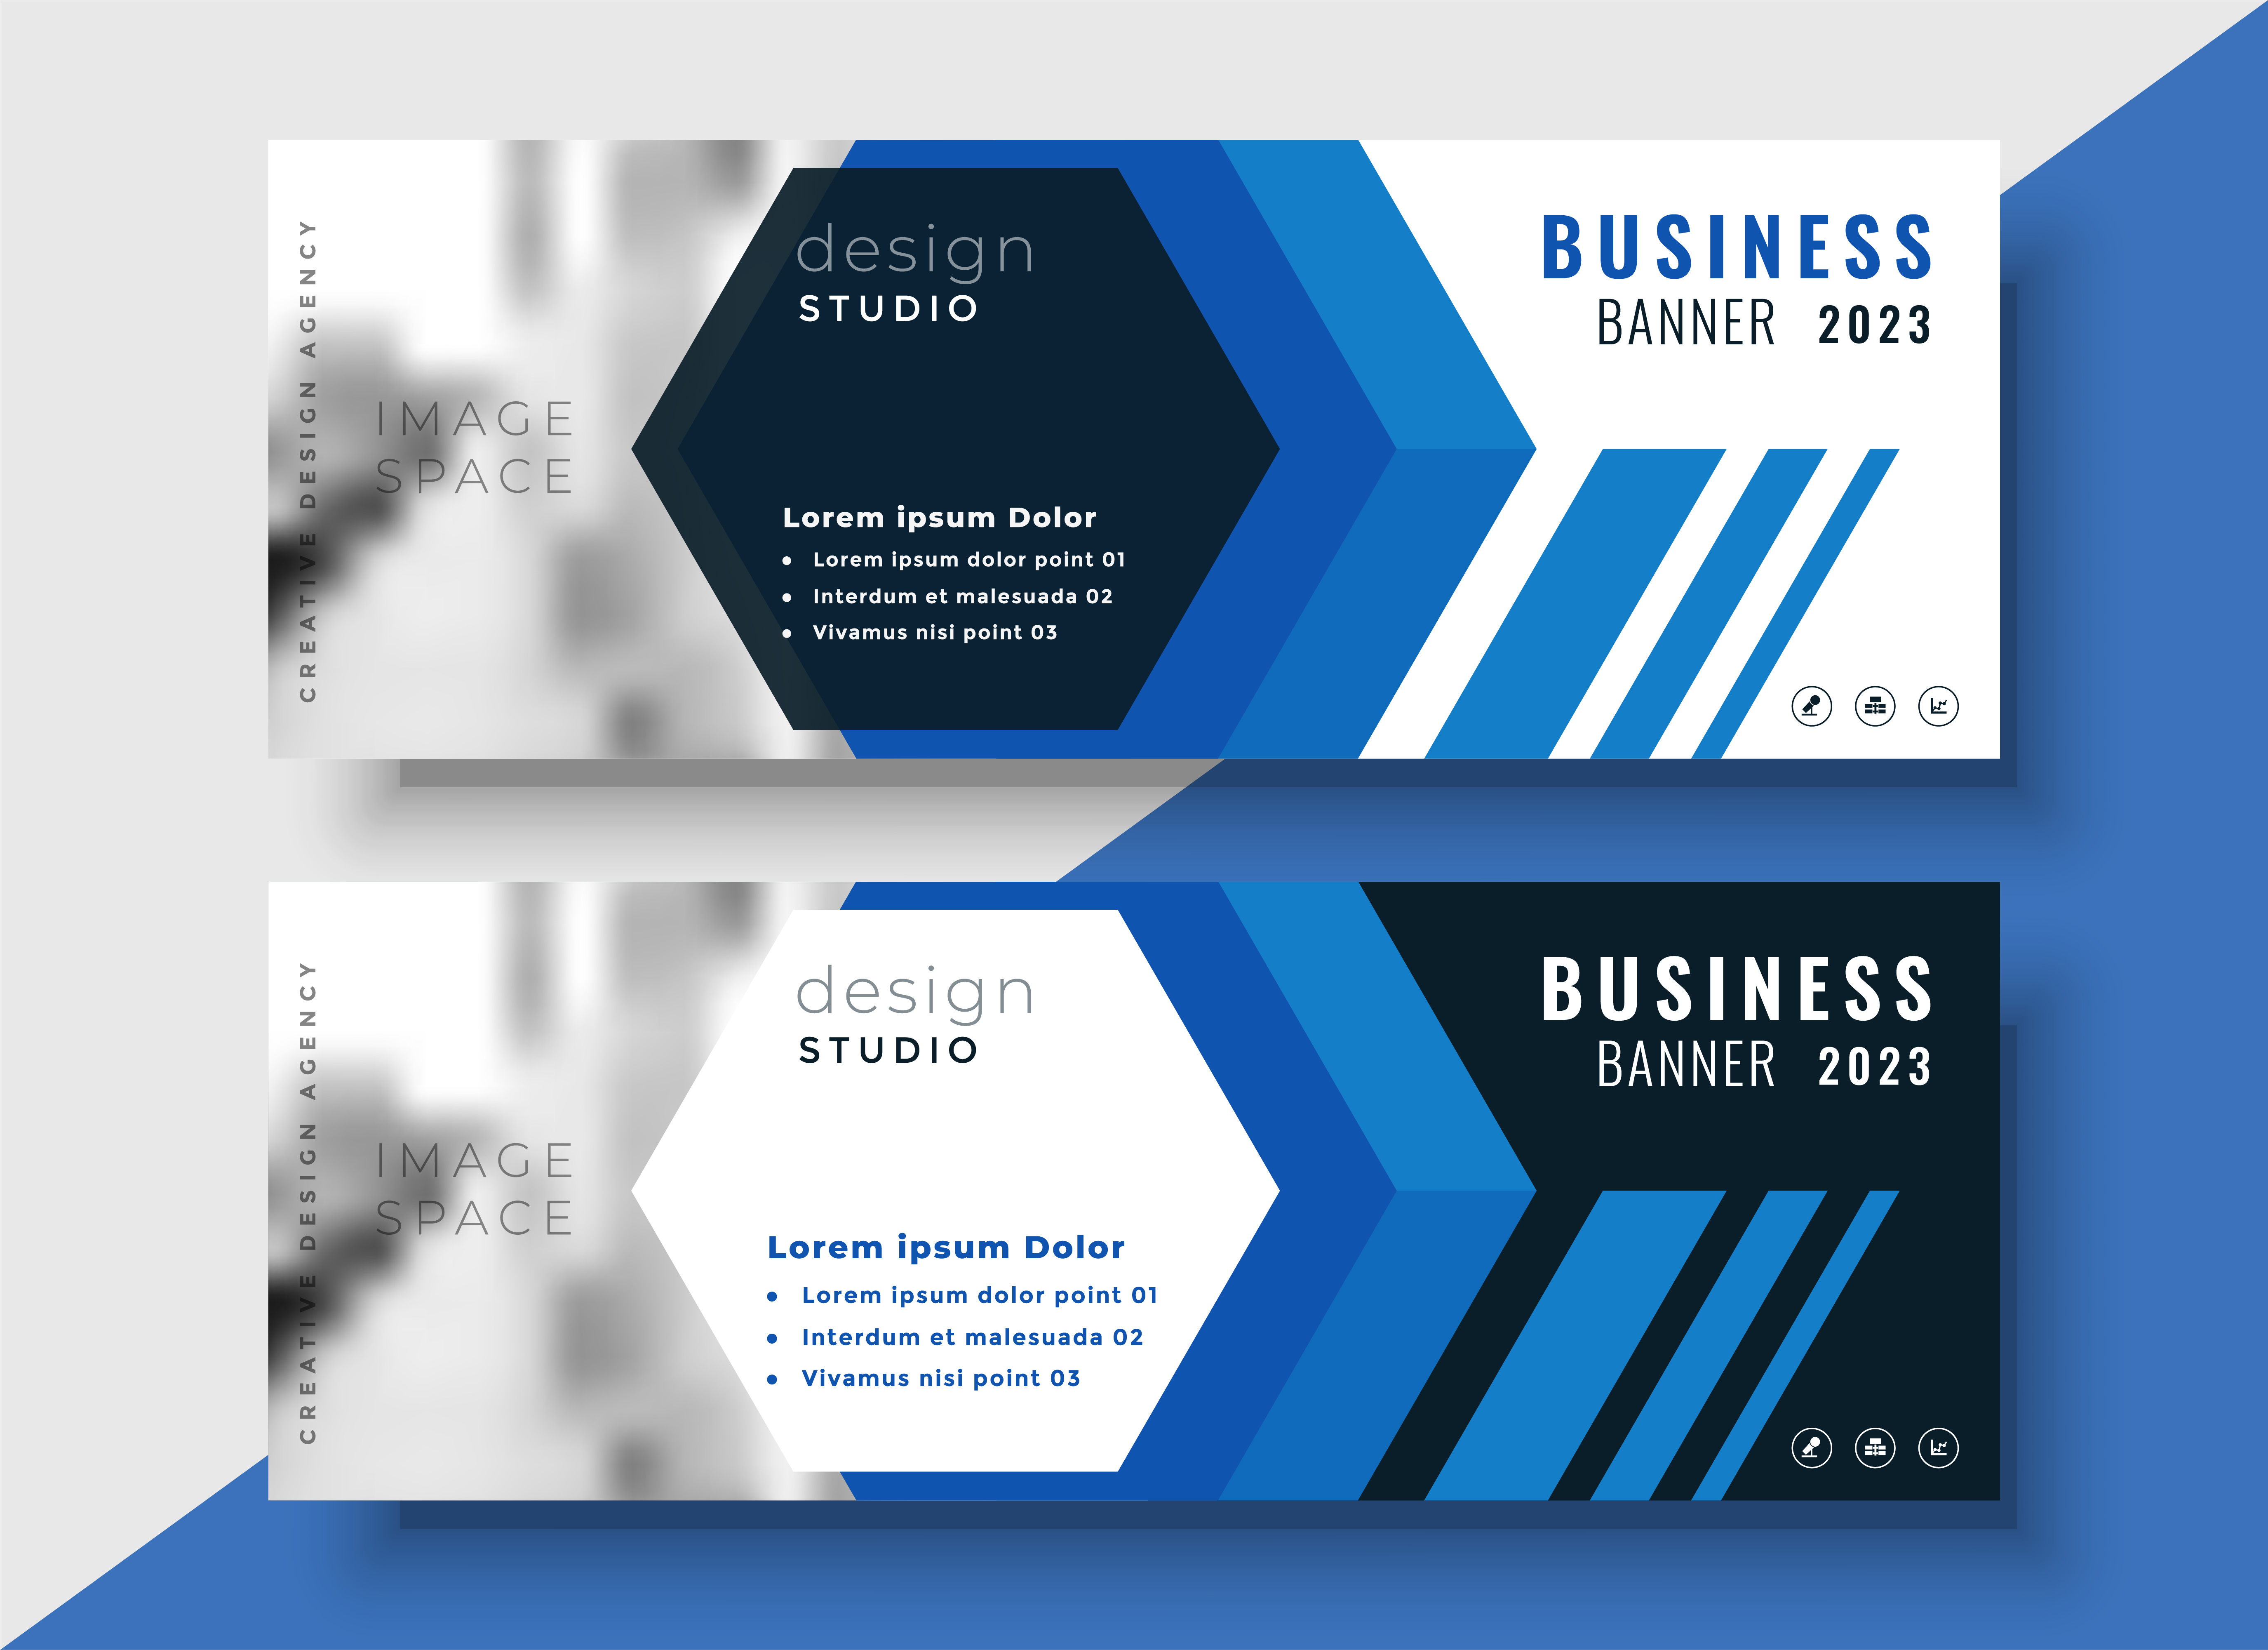 Download geometric blue business banners set with image space ...